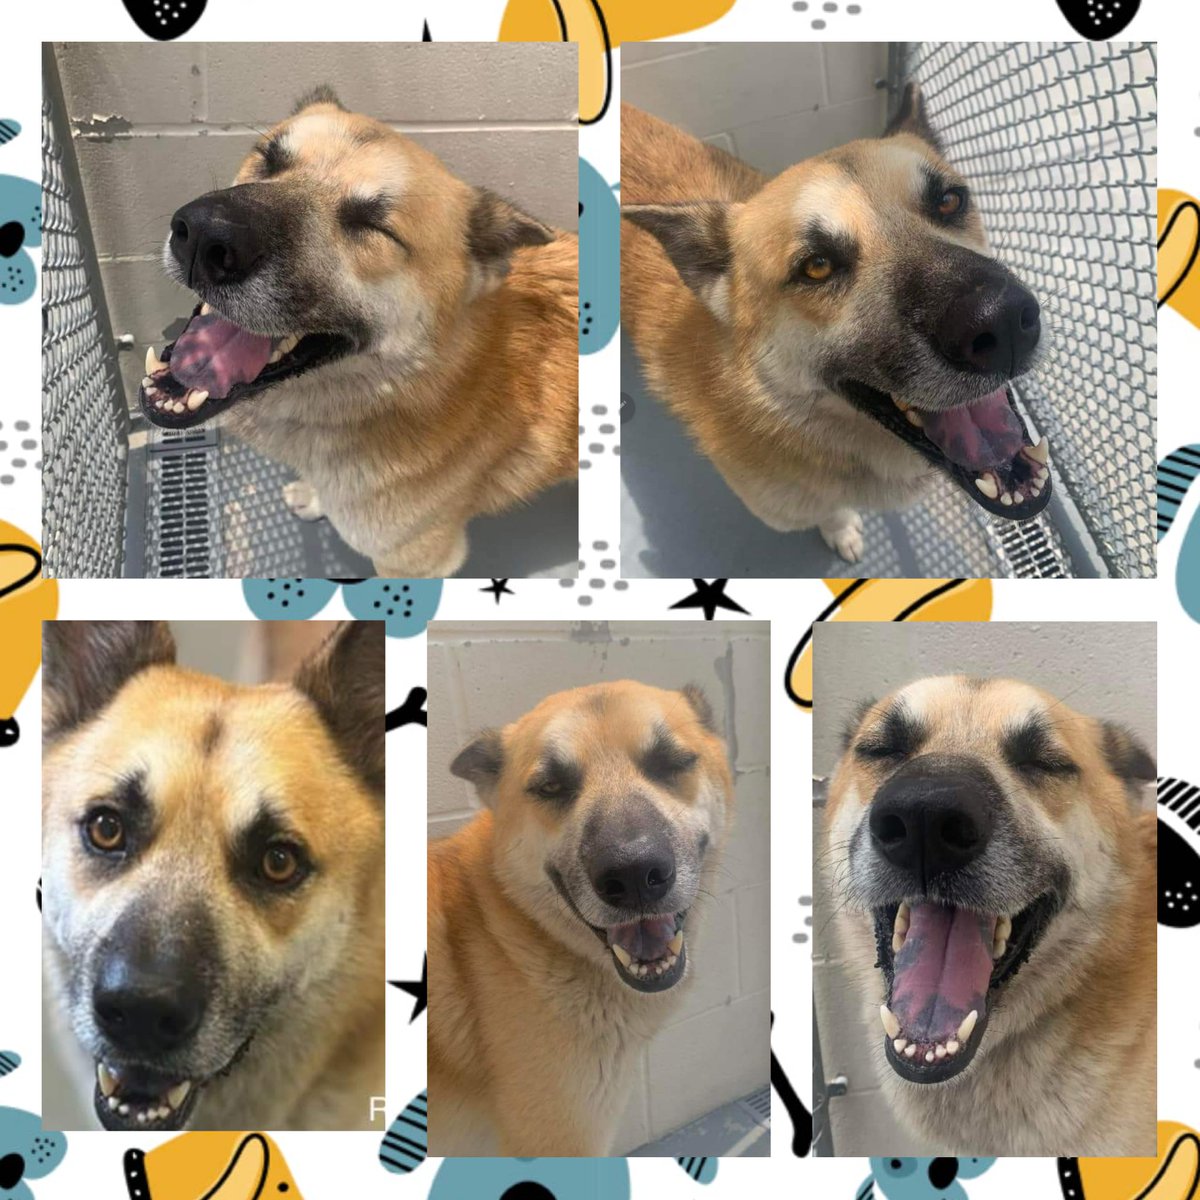 🆘️amazing RAMBO #A366729 likes people,  takes 🍖gently,  has not been dog tested 😡
Why sentence 💉☠️stray #TBK w/o full eval? 
#CorpusChristi #TX hates strays😭😡
ACS 💉☠️ Rambo if not tagged 4/29, day b4 #NationalAdoptAShelterDogDay event on 4/30
Plz RT,  #PledgeForRescue